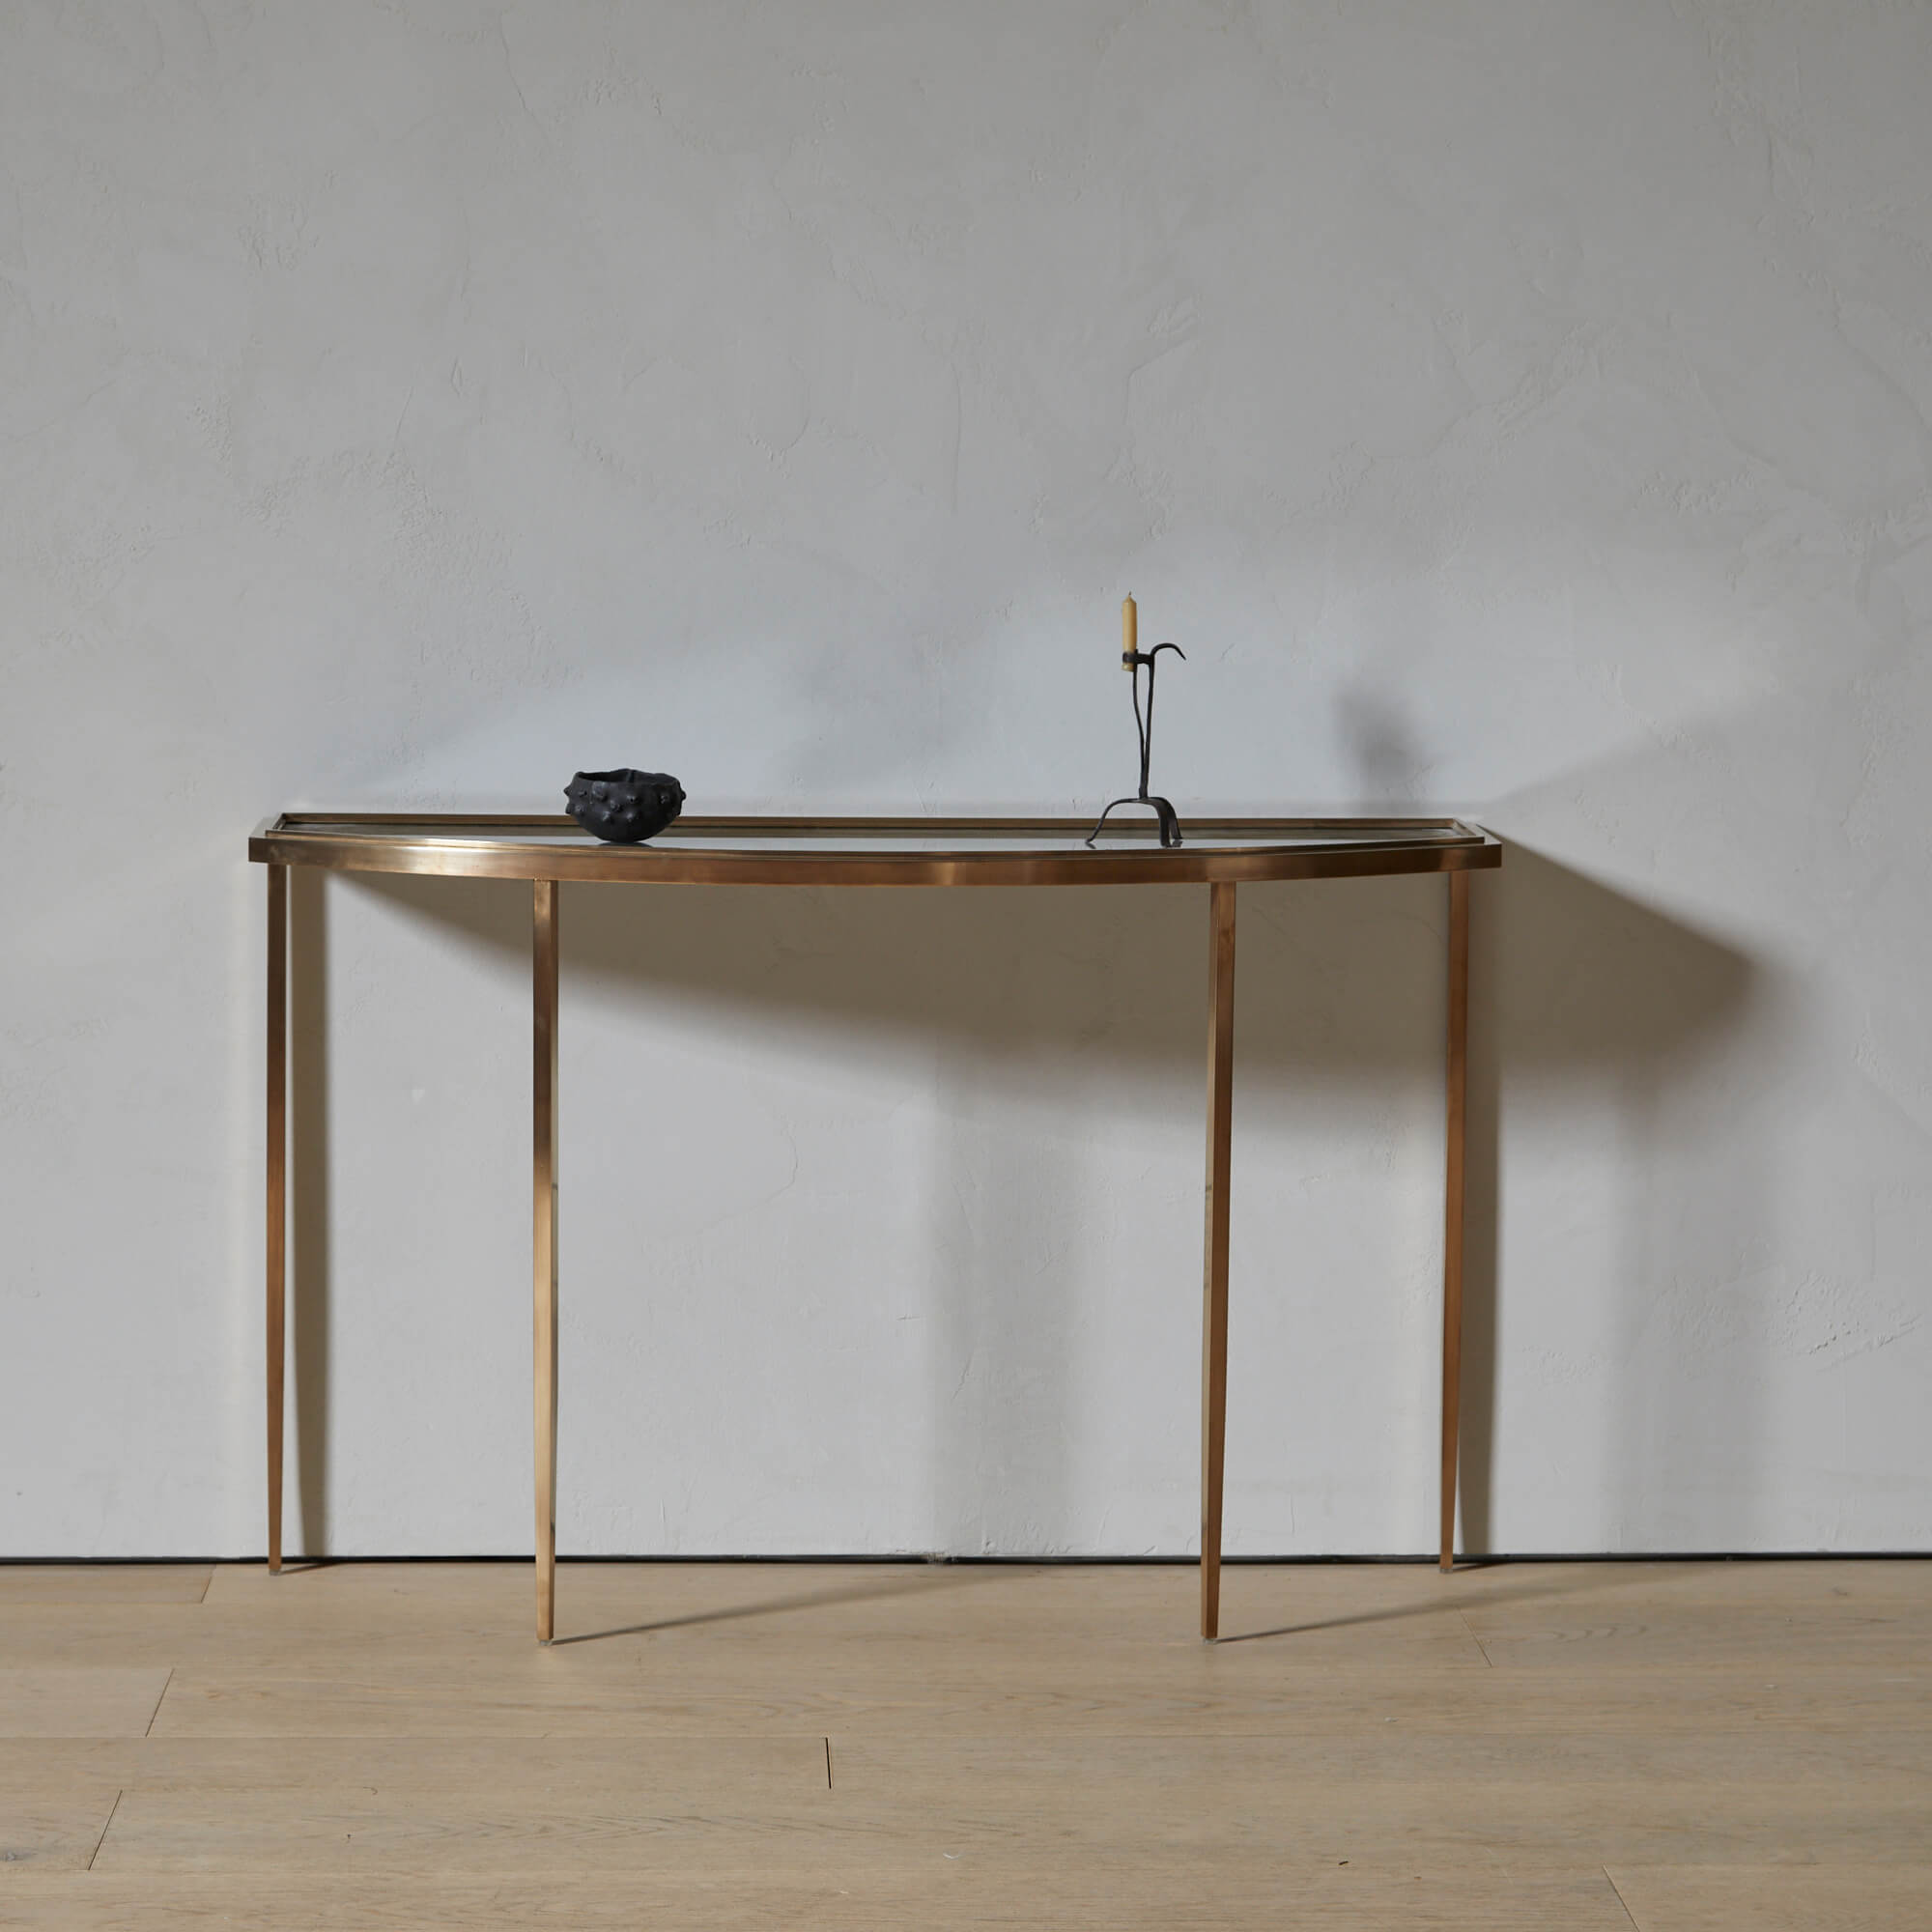 The Vespine Table by Lawton Mull